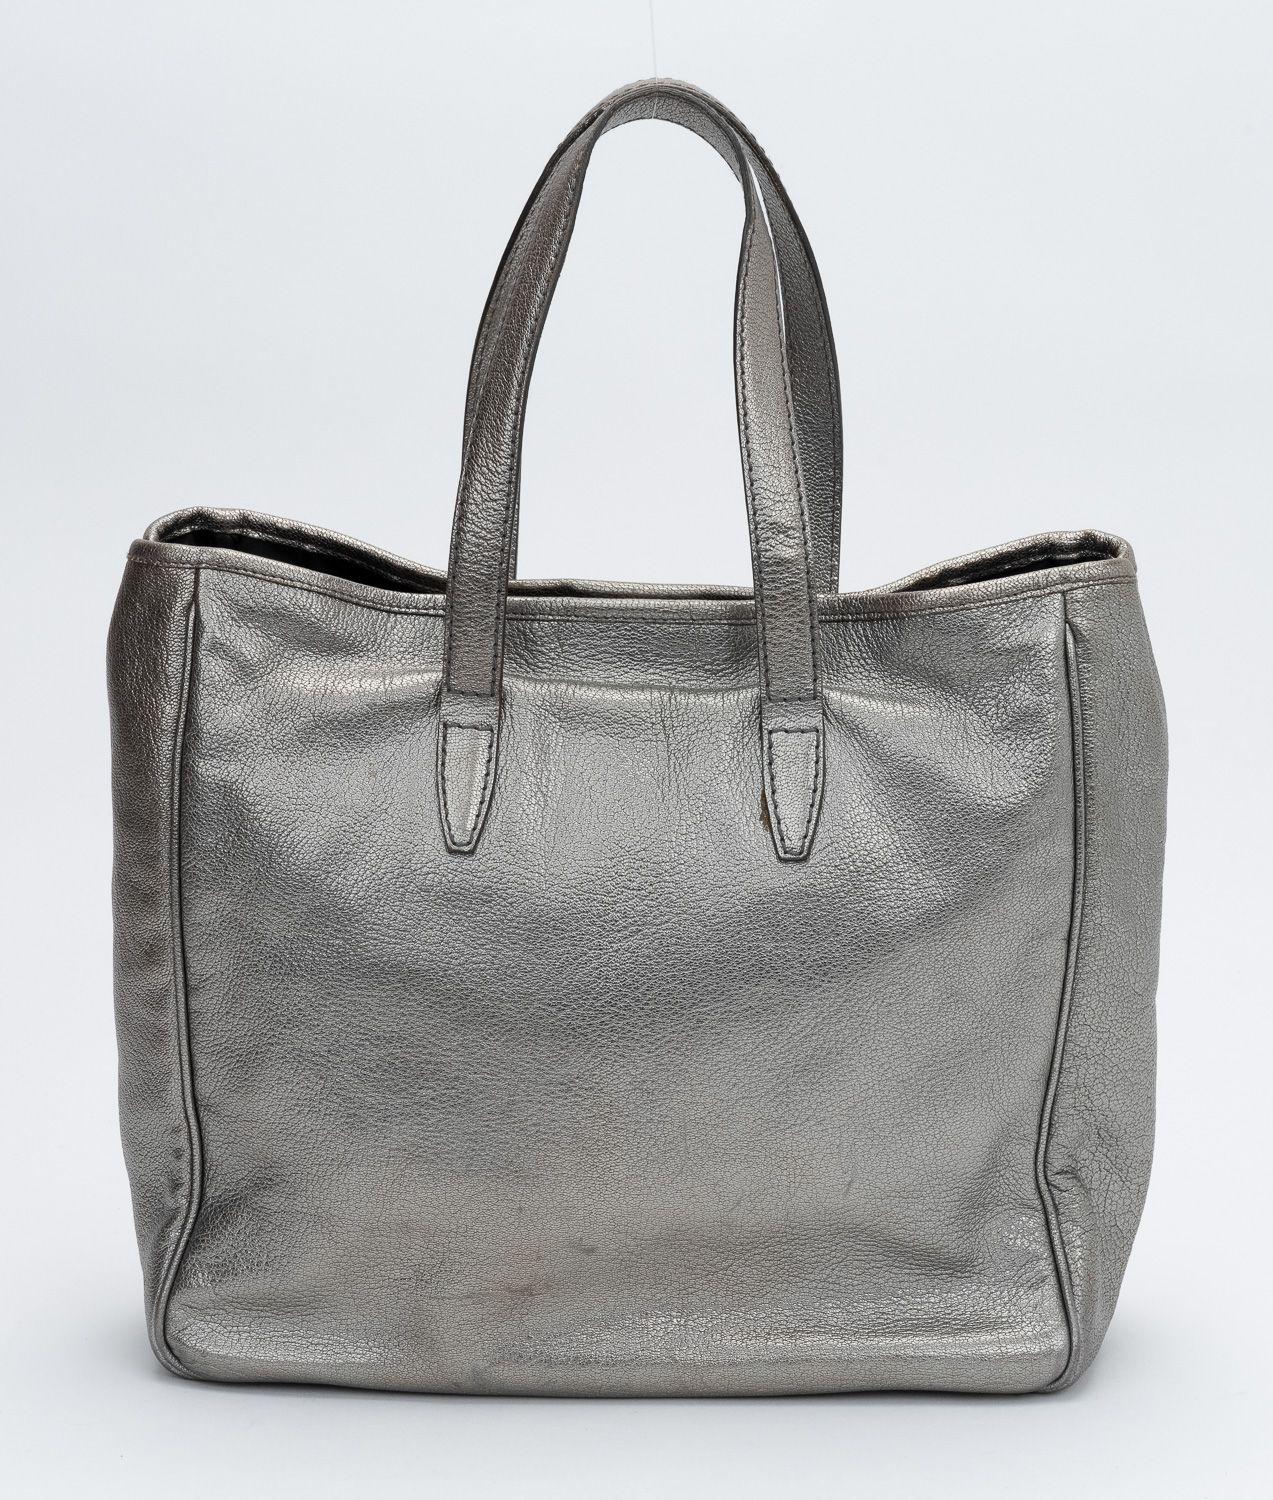 Ysl Platinum Leather Tote In Good Condition In West Hollywood, CA